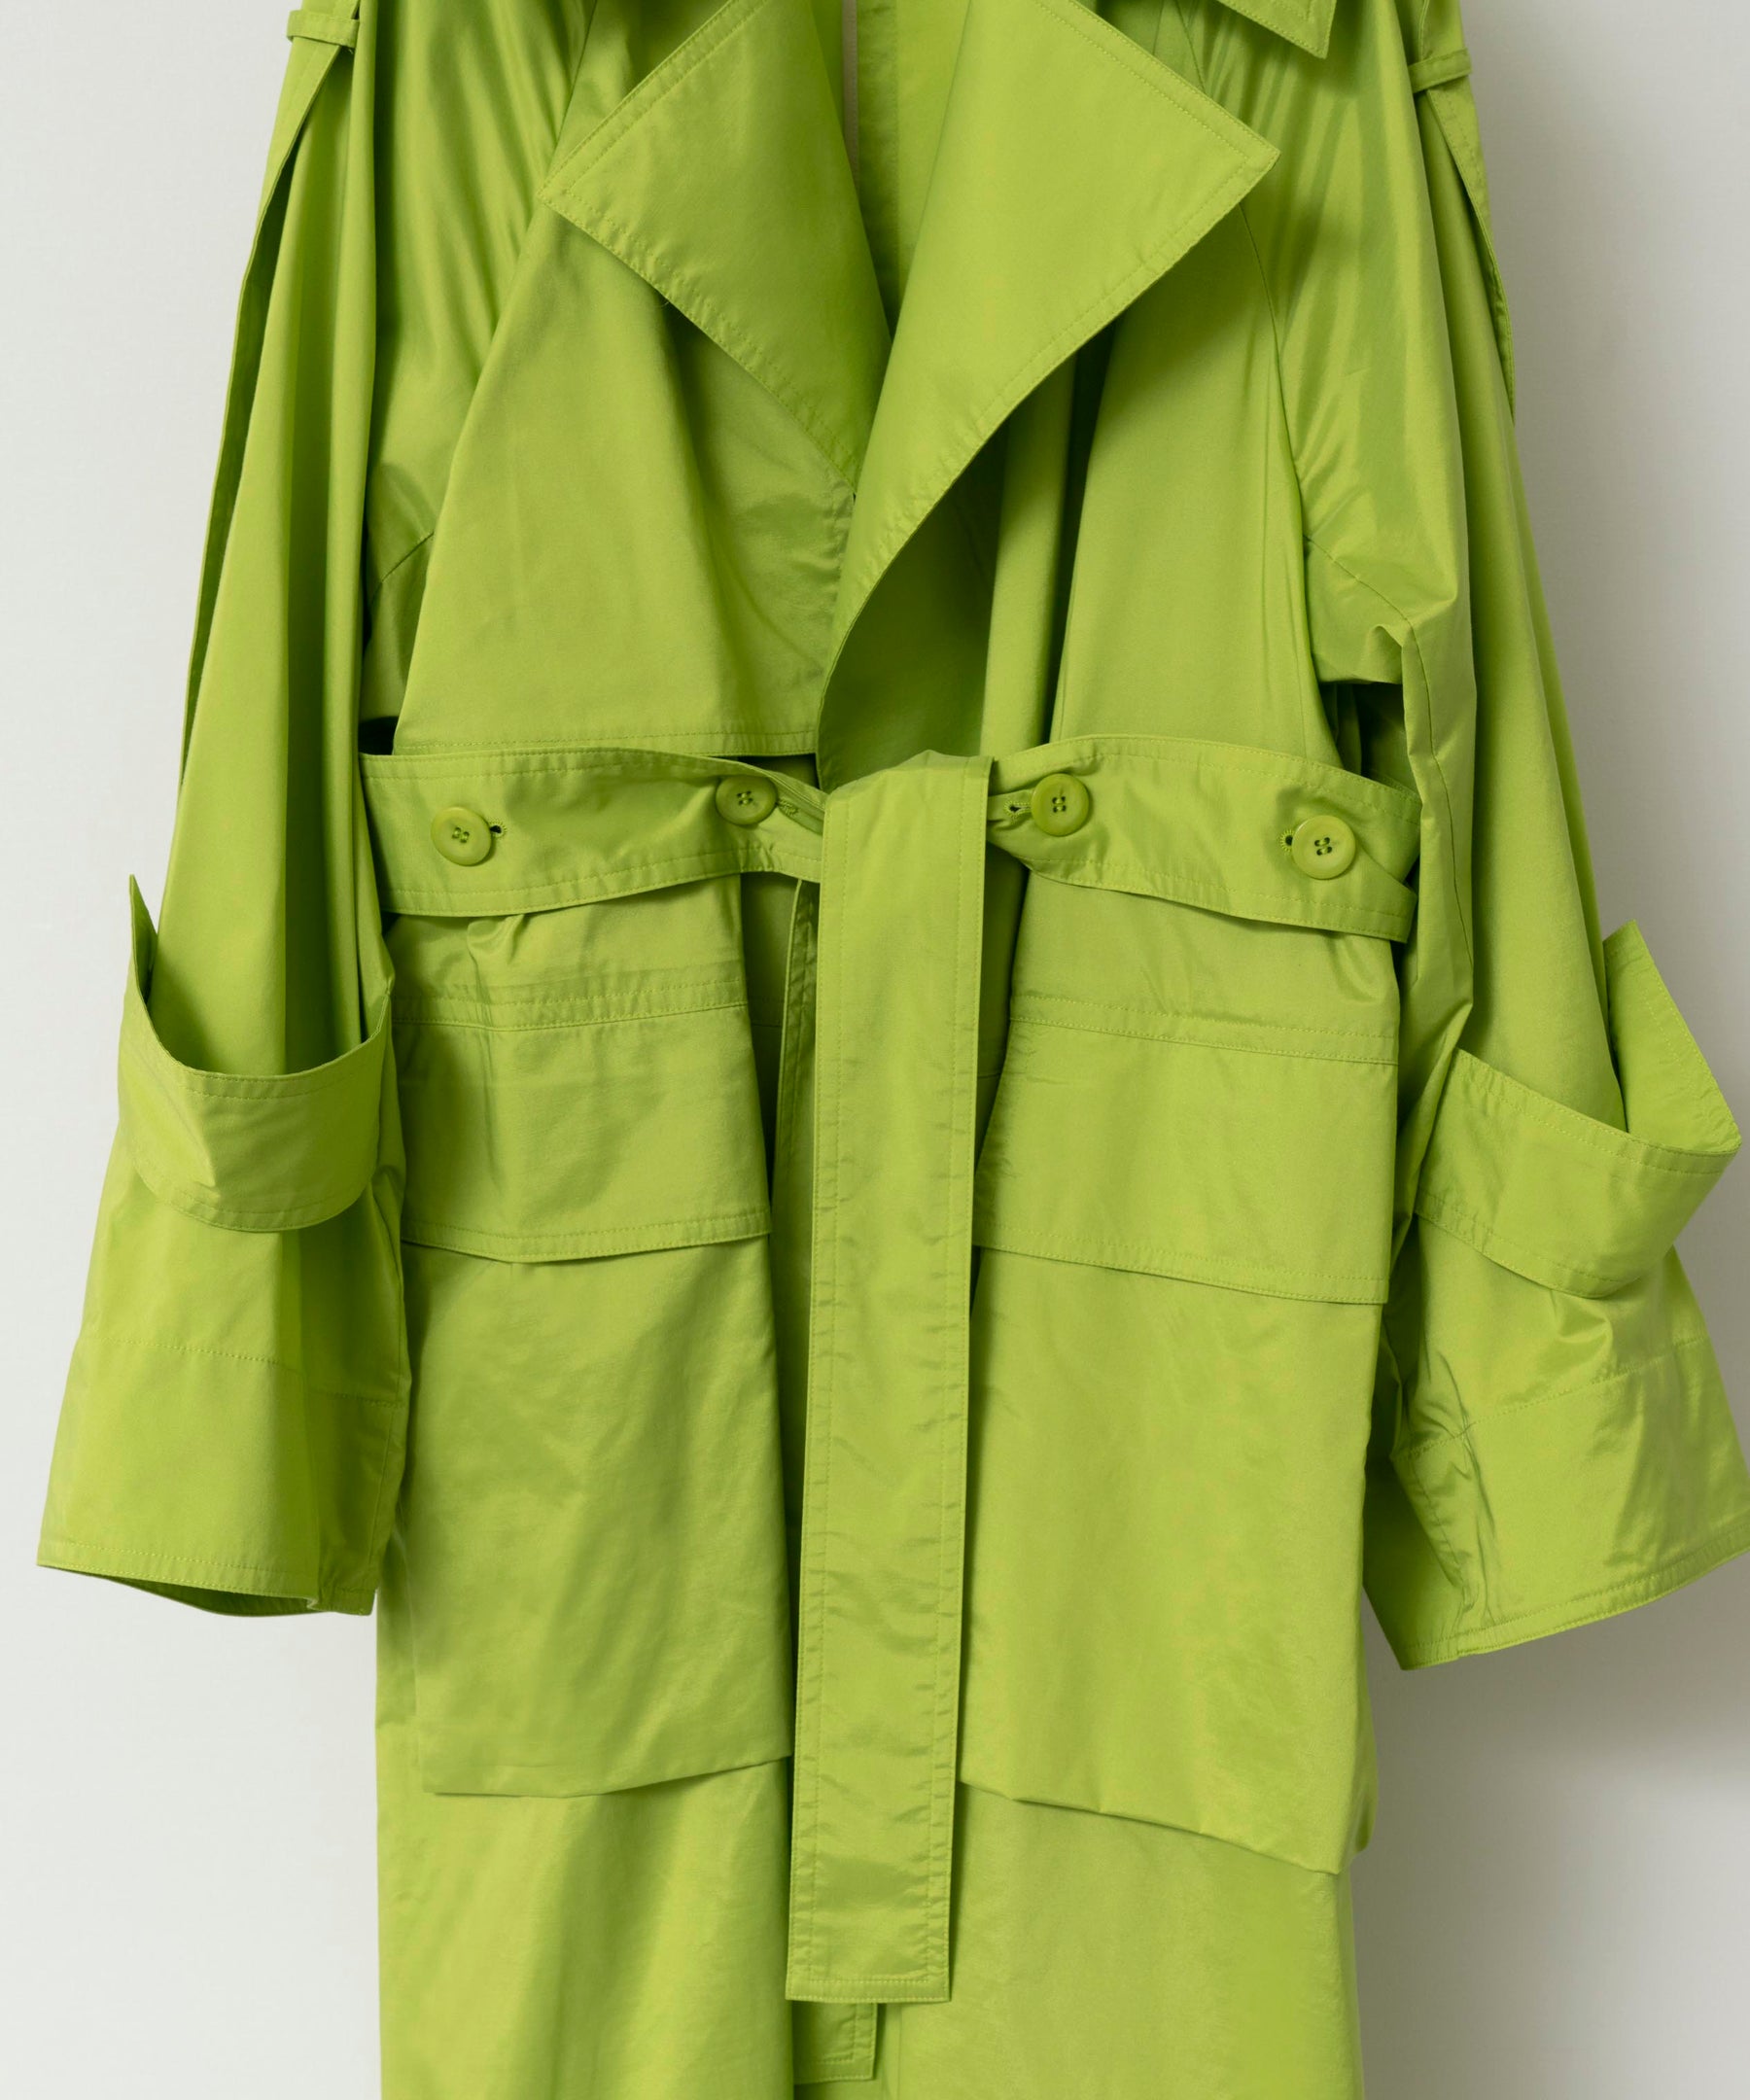 【SALE】Multi Fabric Over Size Trench